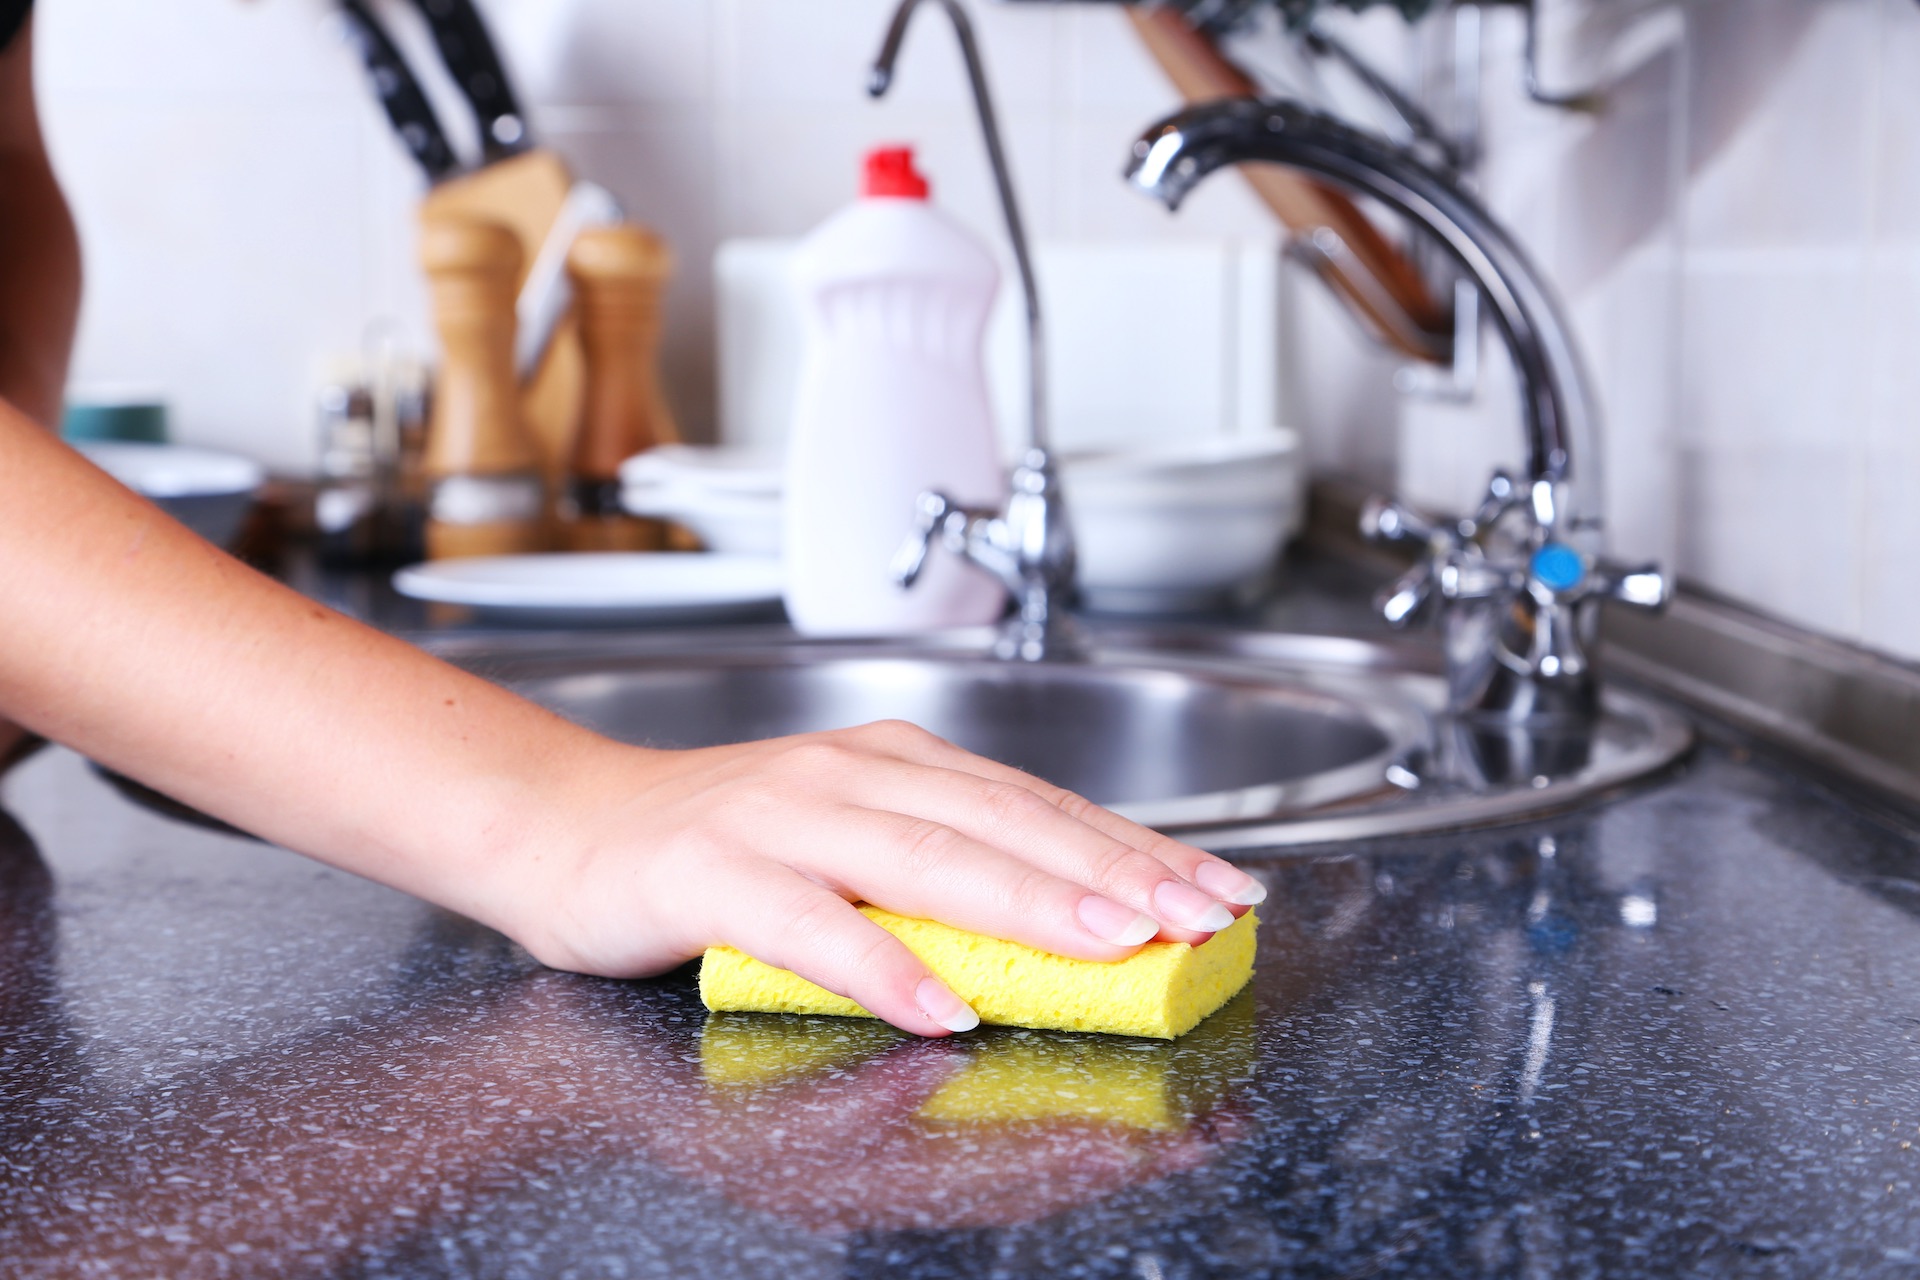 How To Clean Your Kitchen Dettol Nz